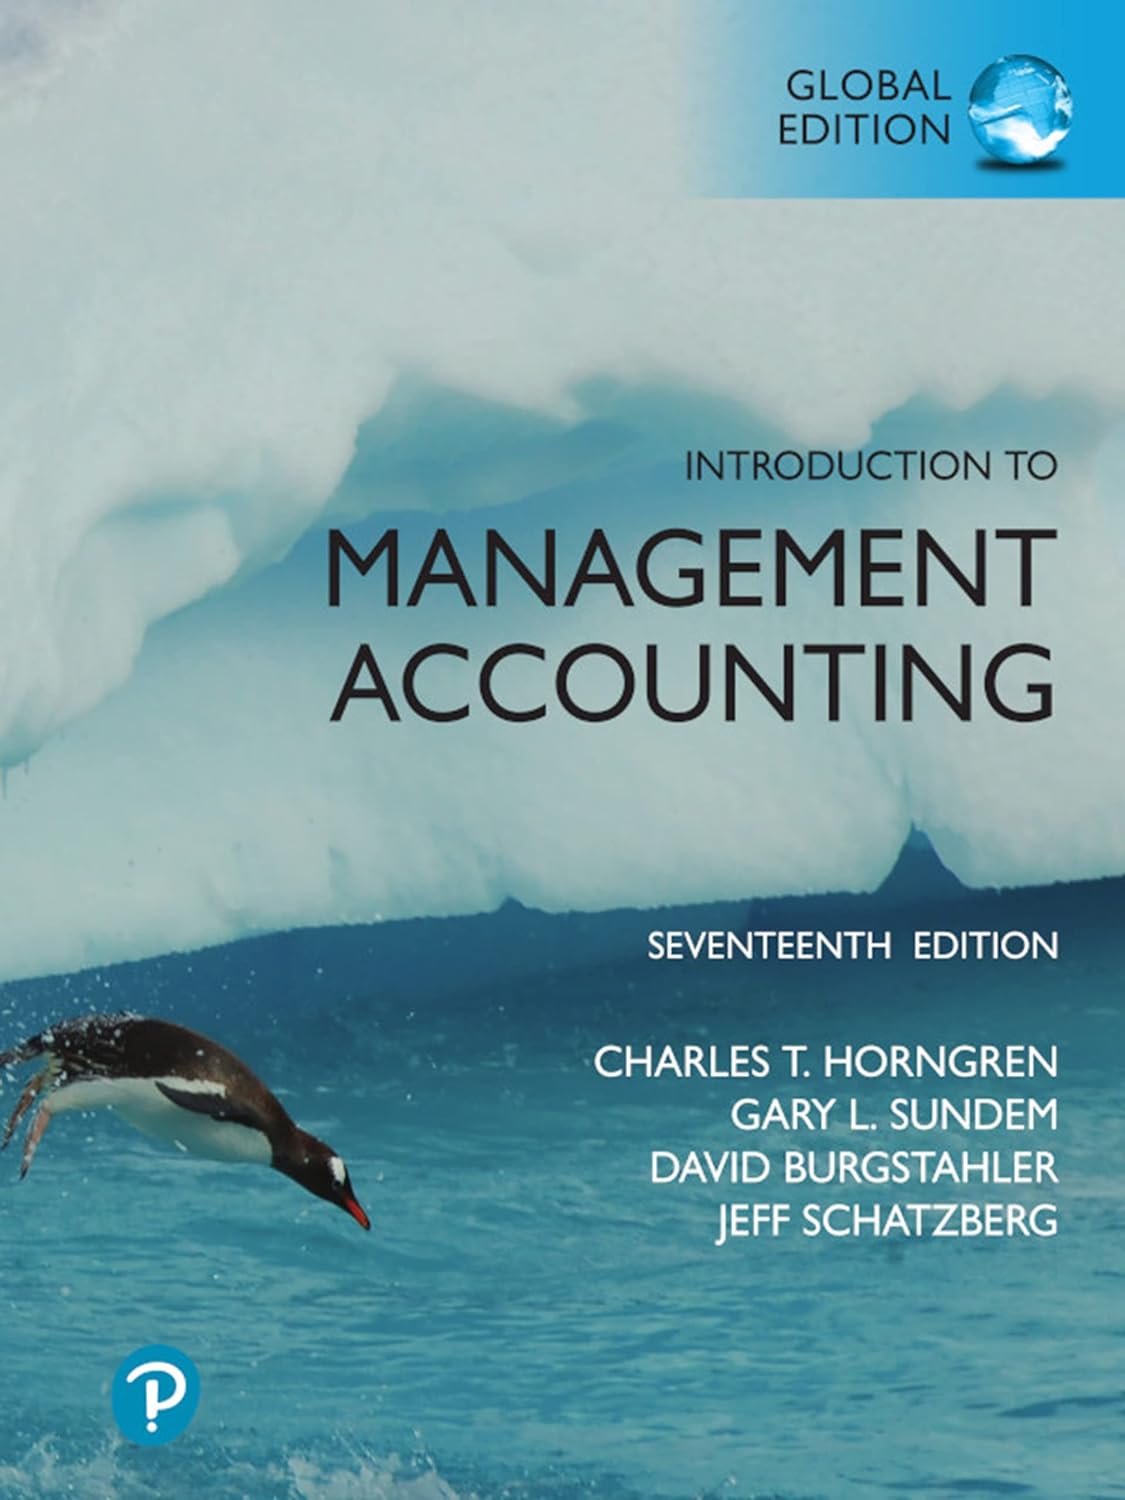 Introduction to Management Accounting, Global Edition 17th Edition